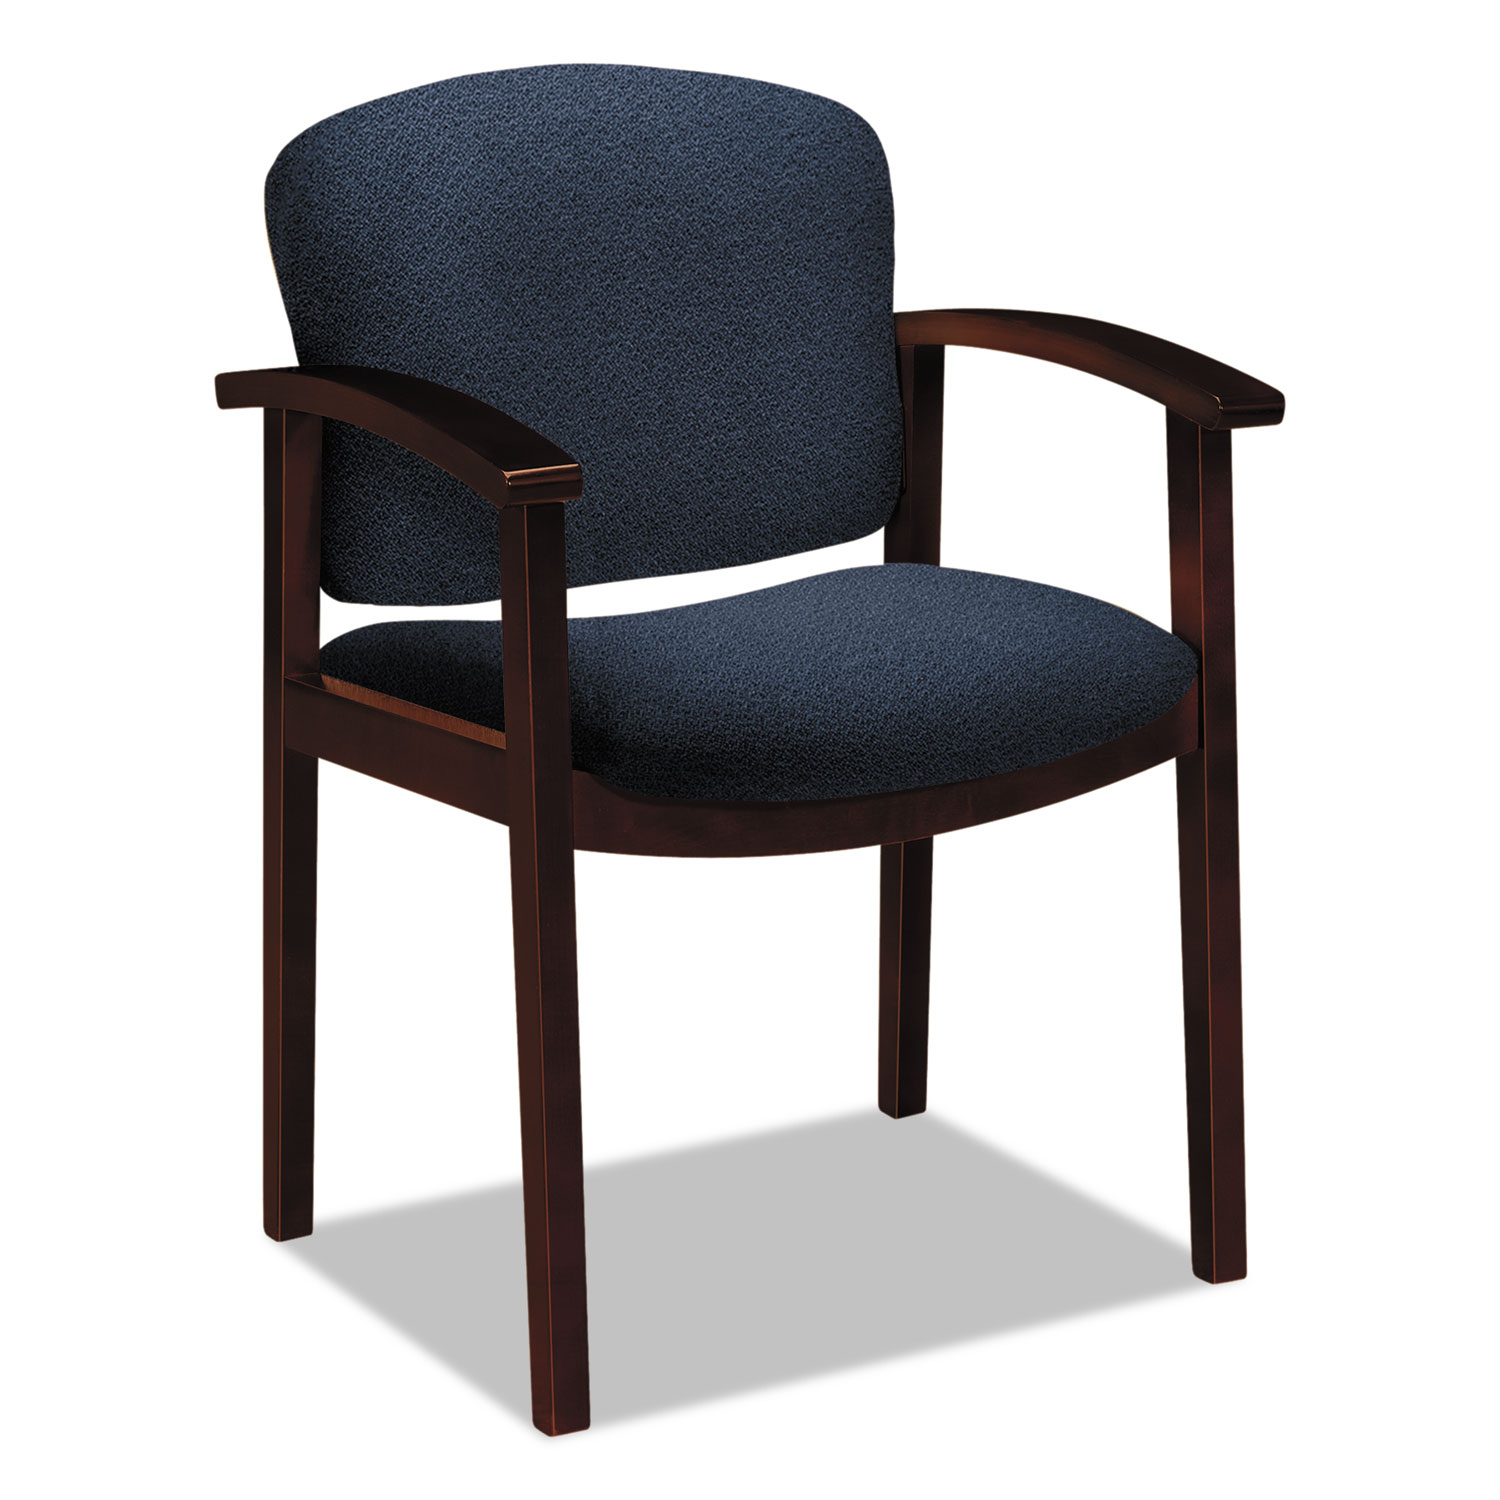 2111 Invitation Reception Series Wood Guest Chair, Mahogany/Solid Blue Fabric